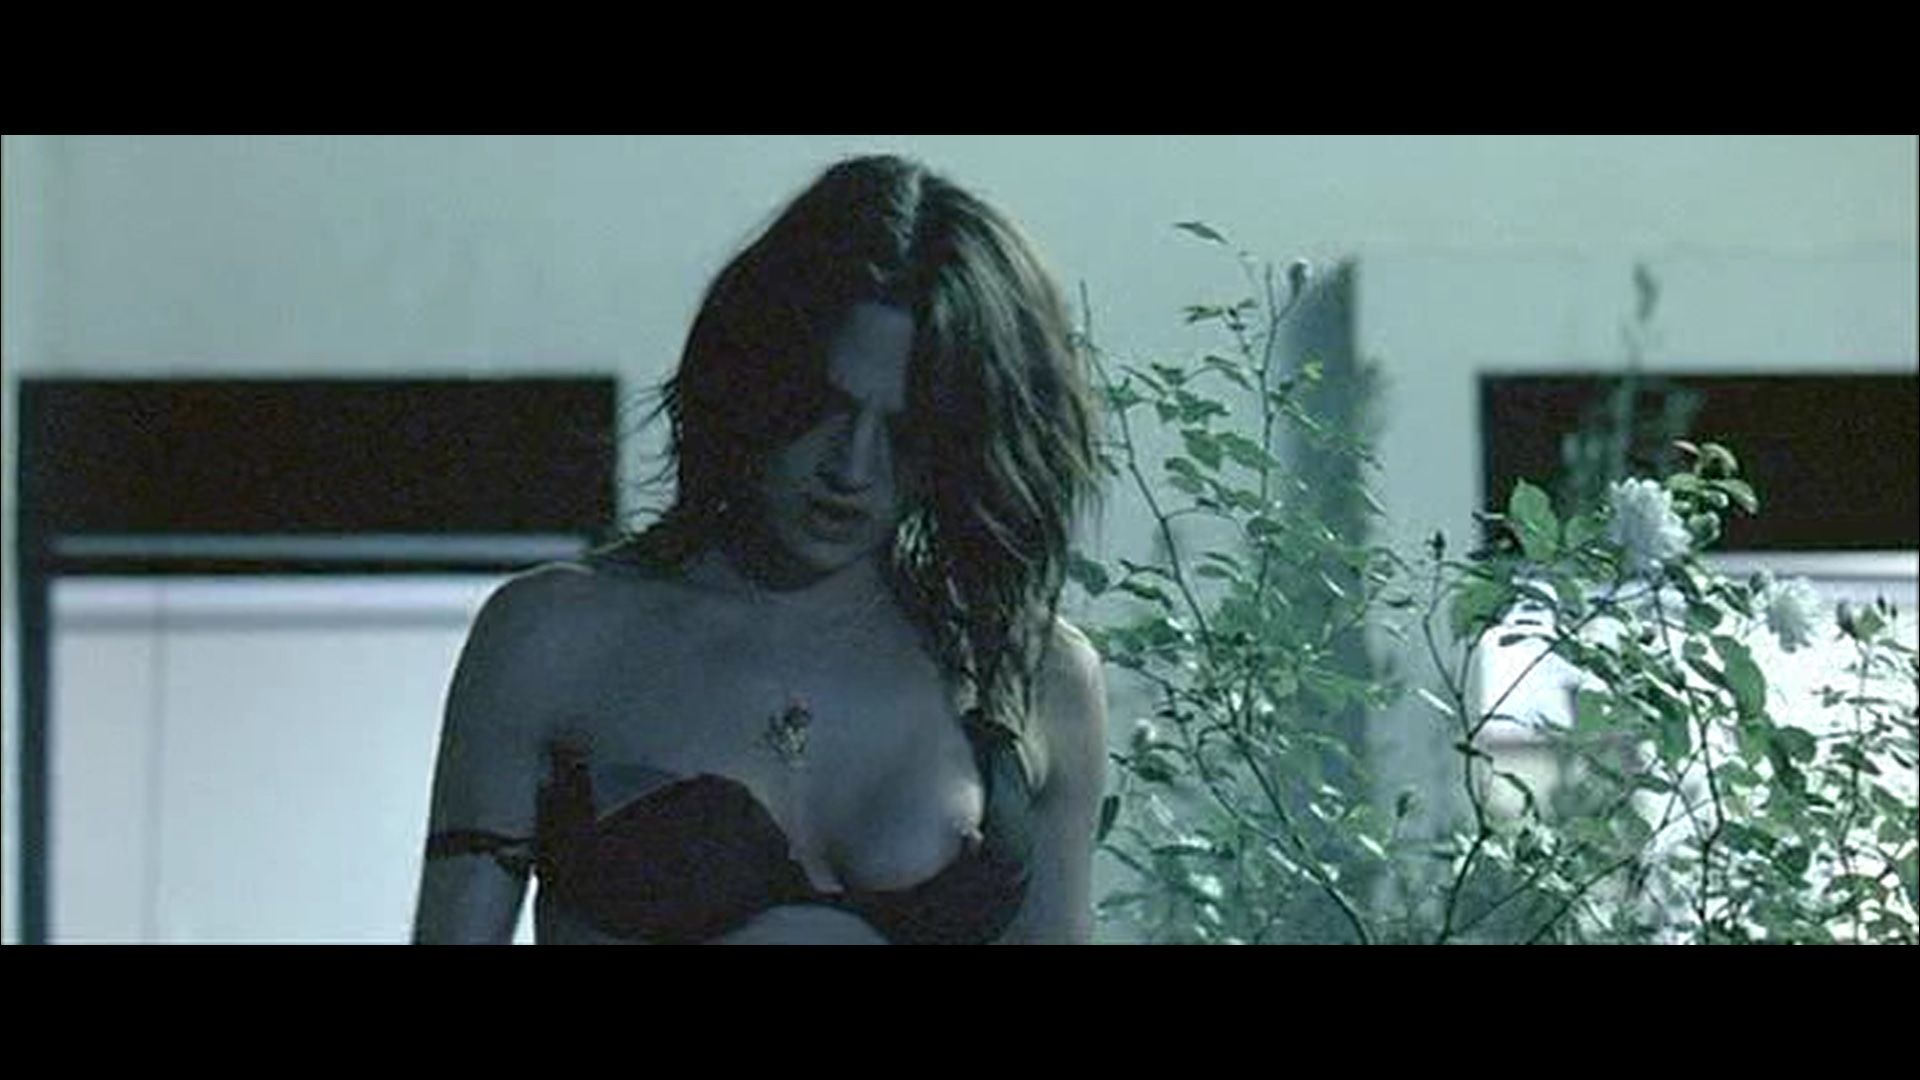 Asia Argento full frontal nudity in the mainstream movie Scarlet Diva.